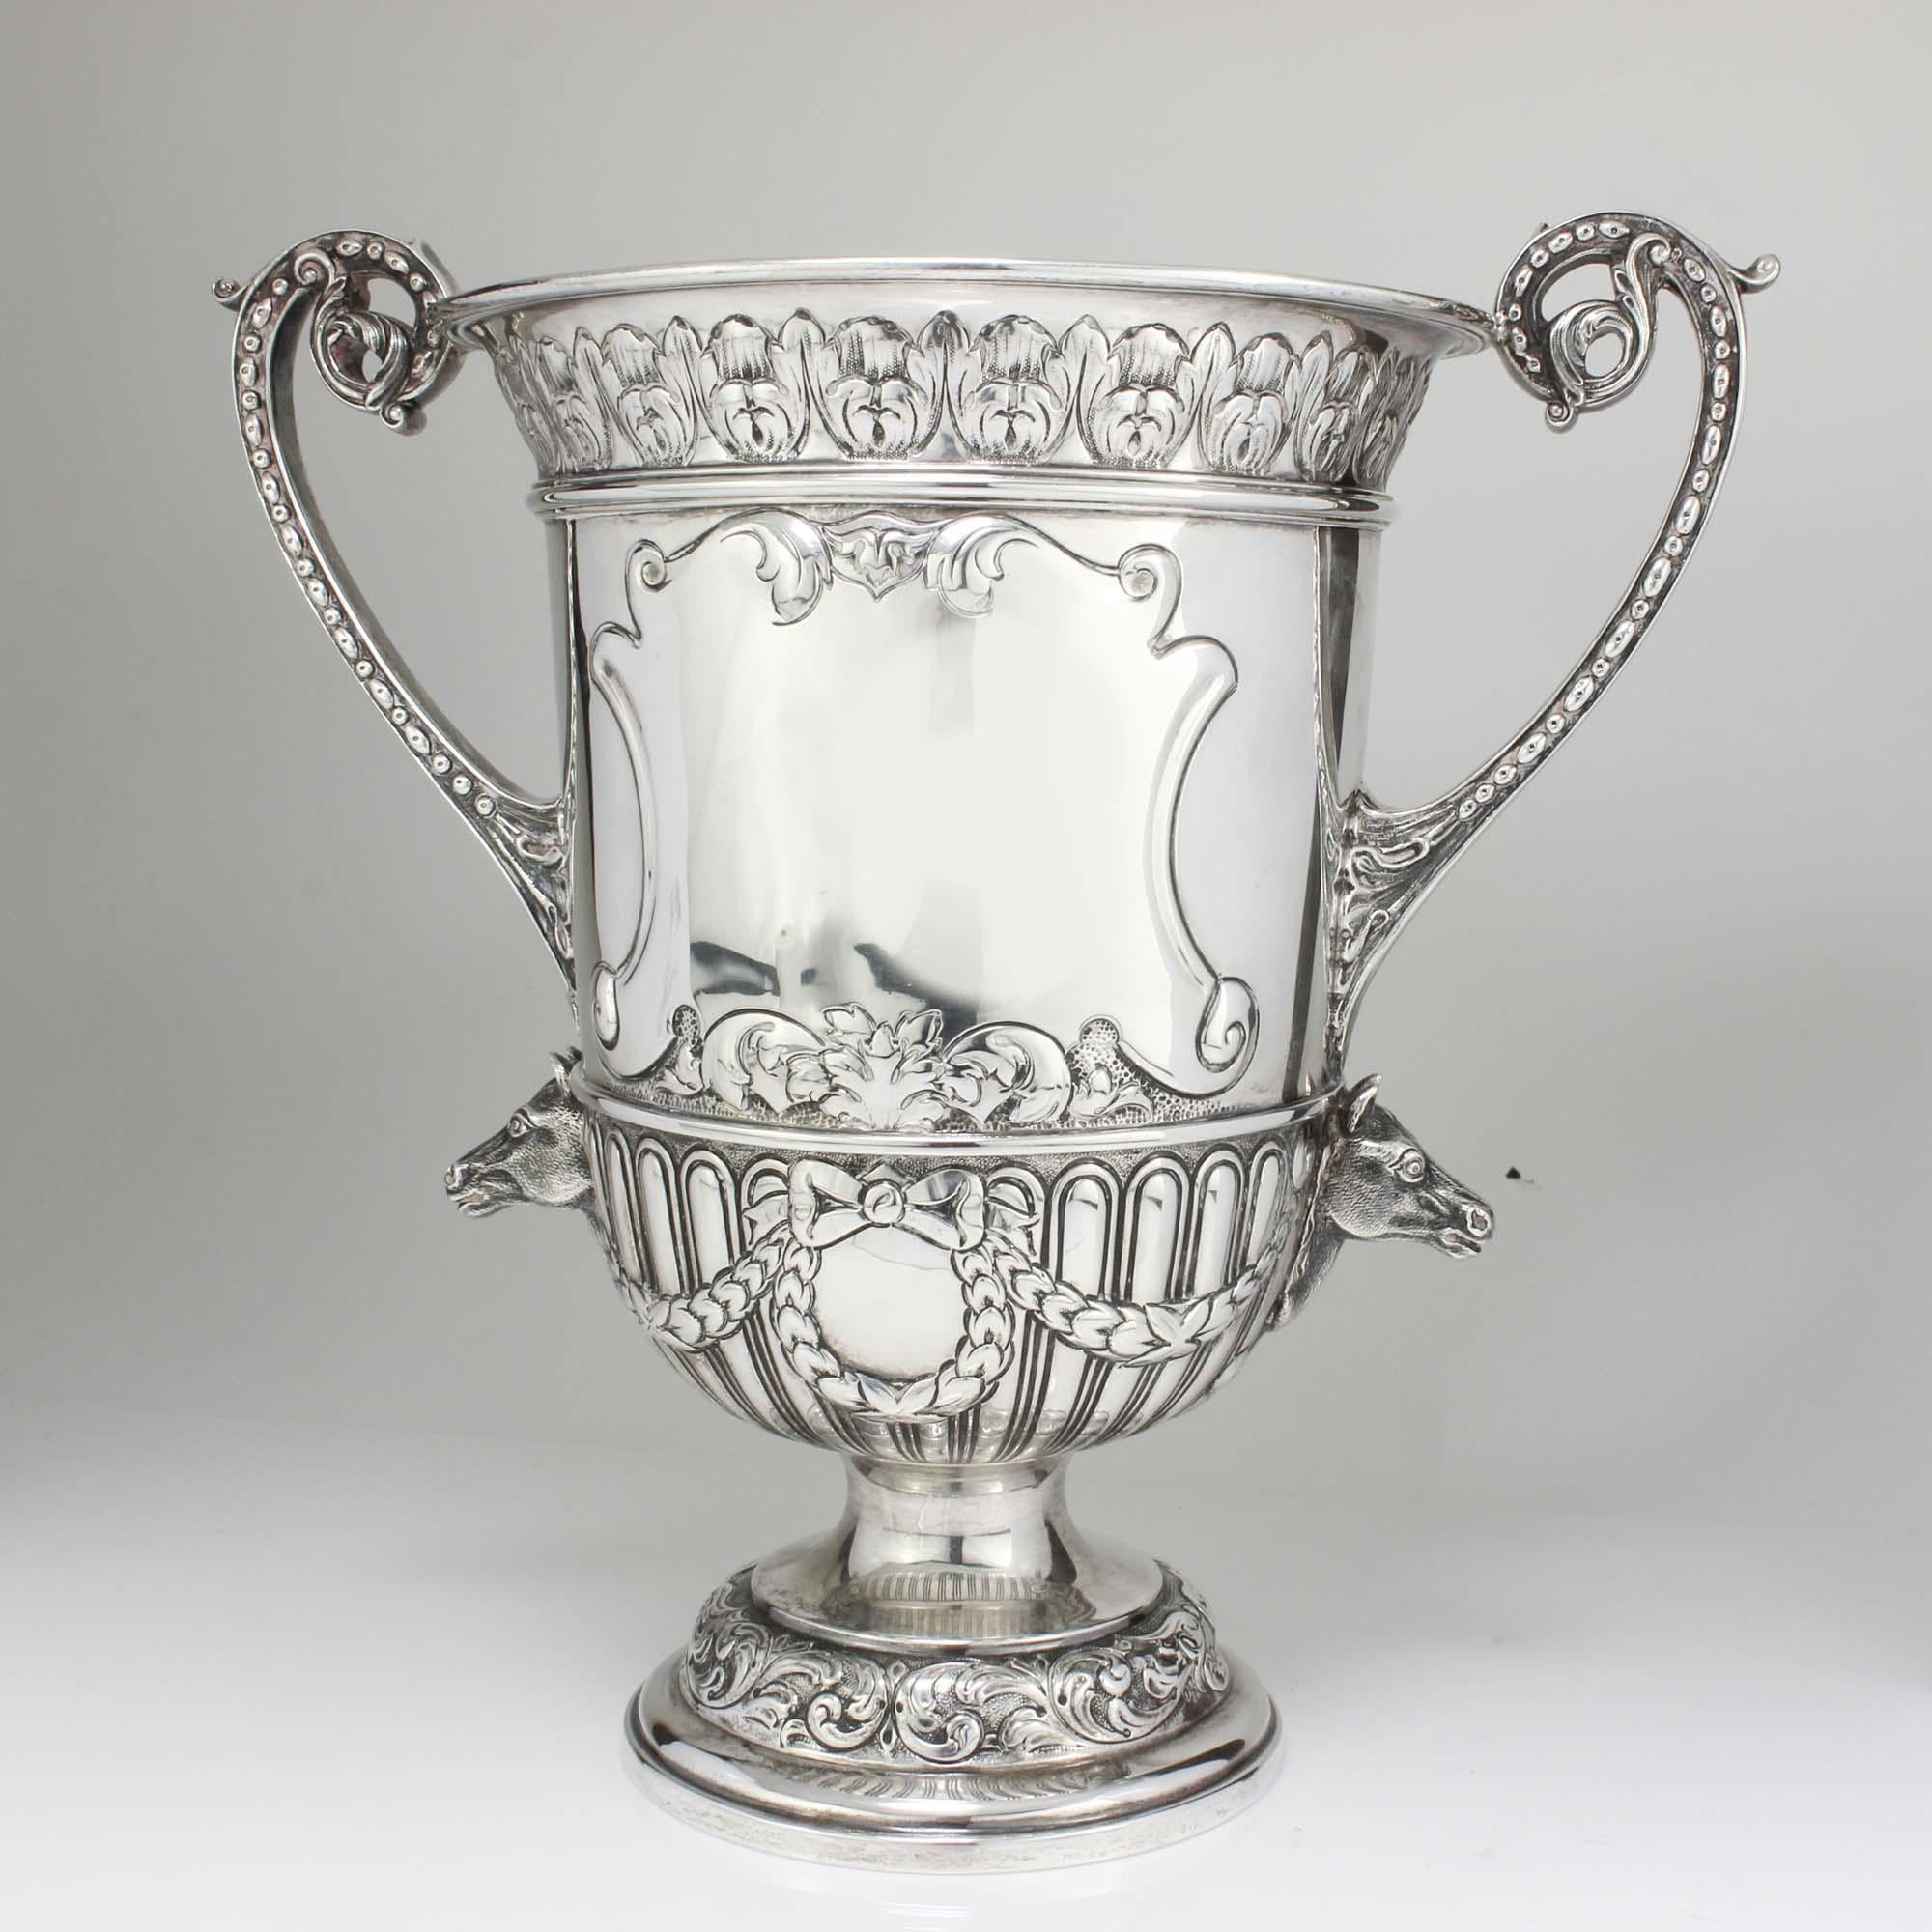 Antique Edwardian Silver trophy with two handles, featuring an engraving with horse rider and horse's heads
Maker: Carrington & Co 
Made in: London, 1904
Fully hallmarked.

Dimensions - 
Length: 22.5 cm
Width: 15 cm
Height: 21 cm
Weight: